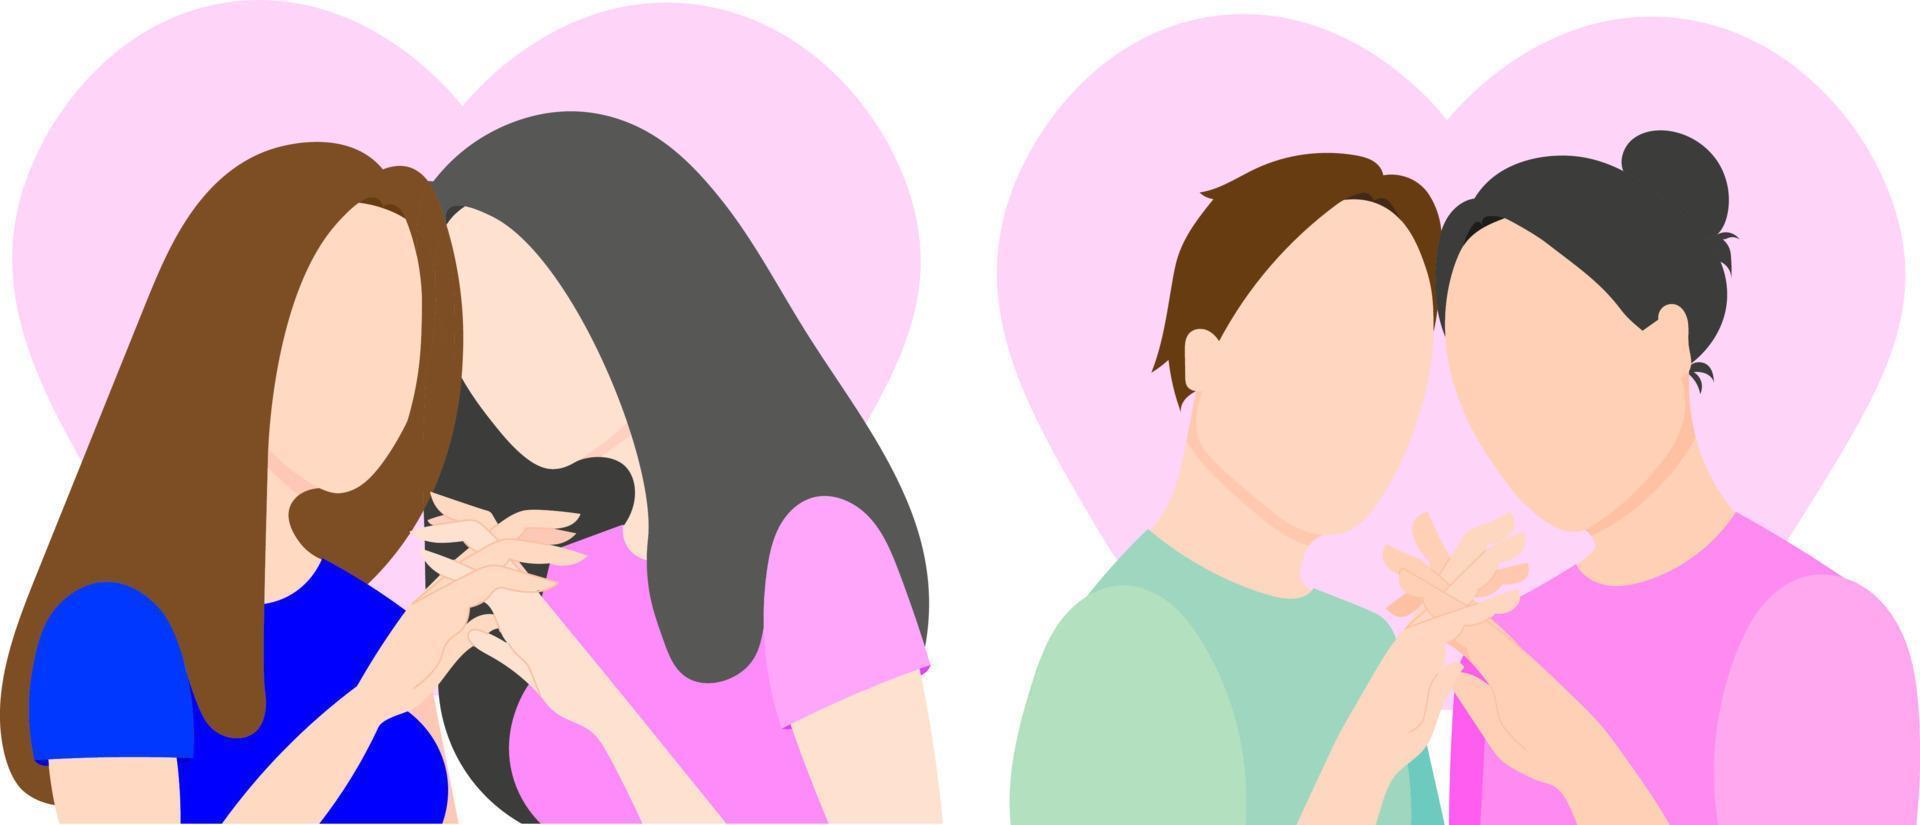 A set of two LGBT couples holding hands. Flat vector illustration. Gays and lesbians